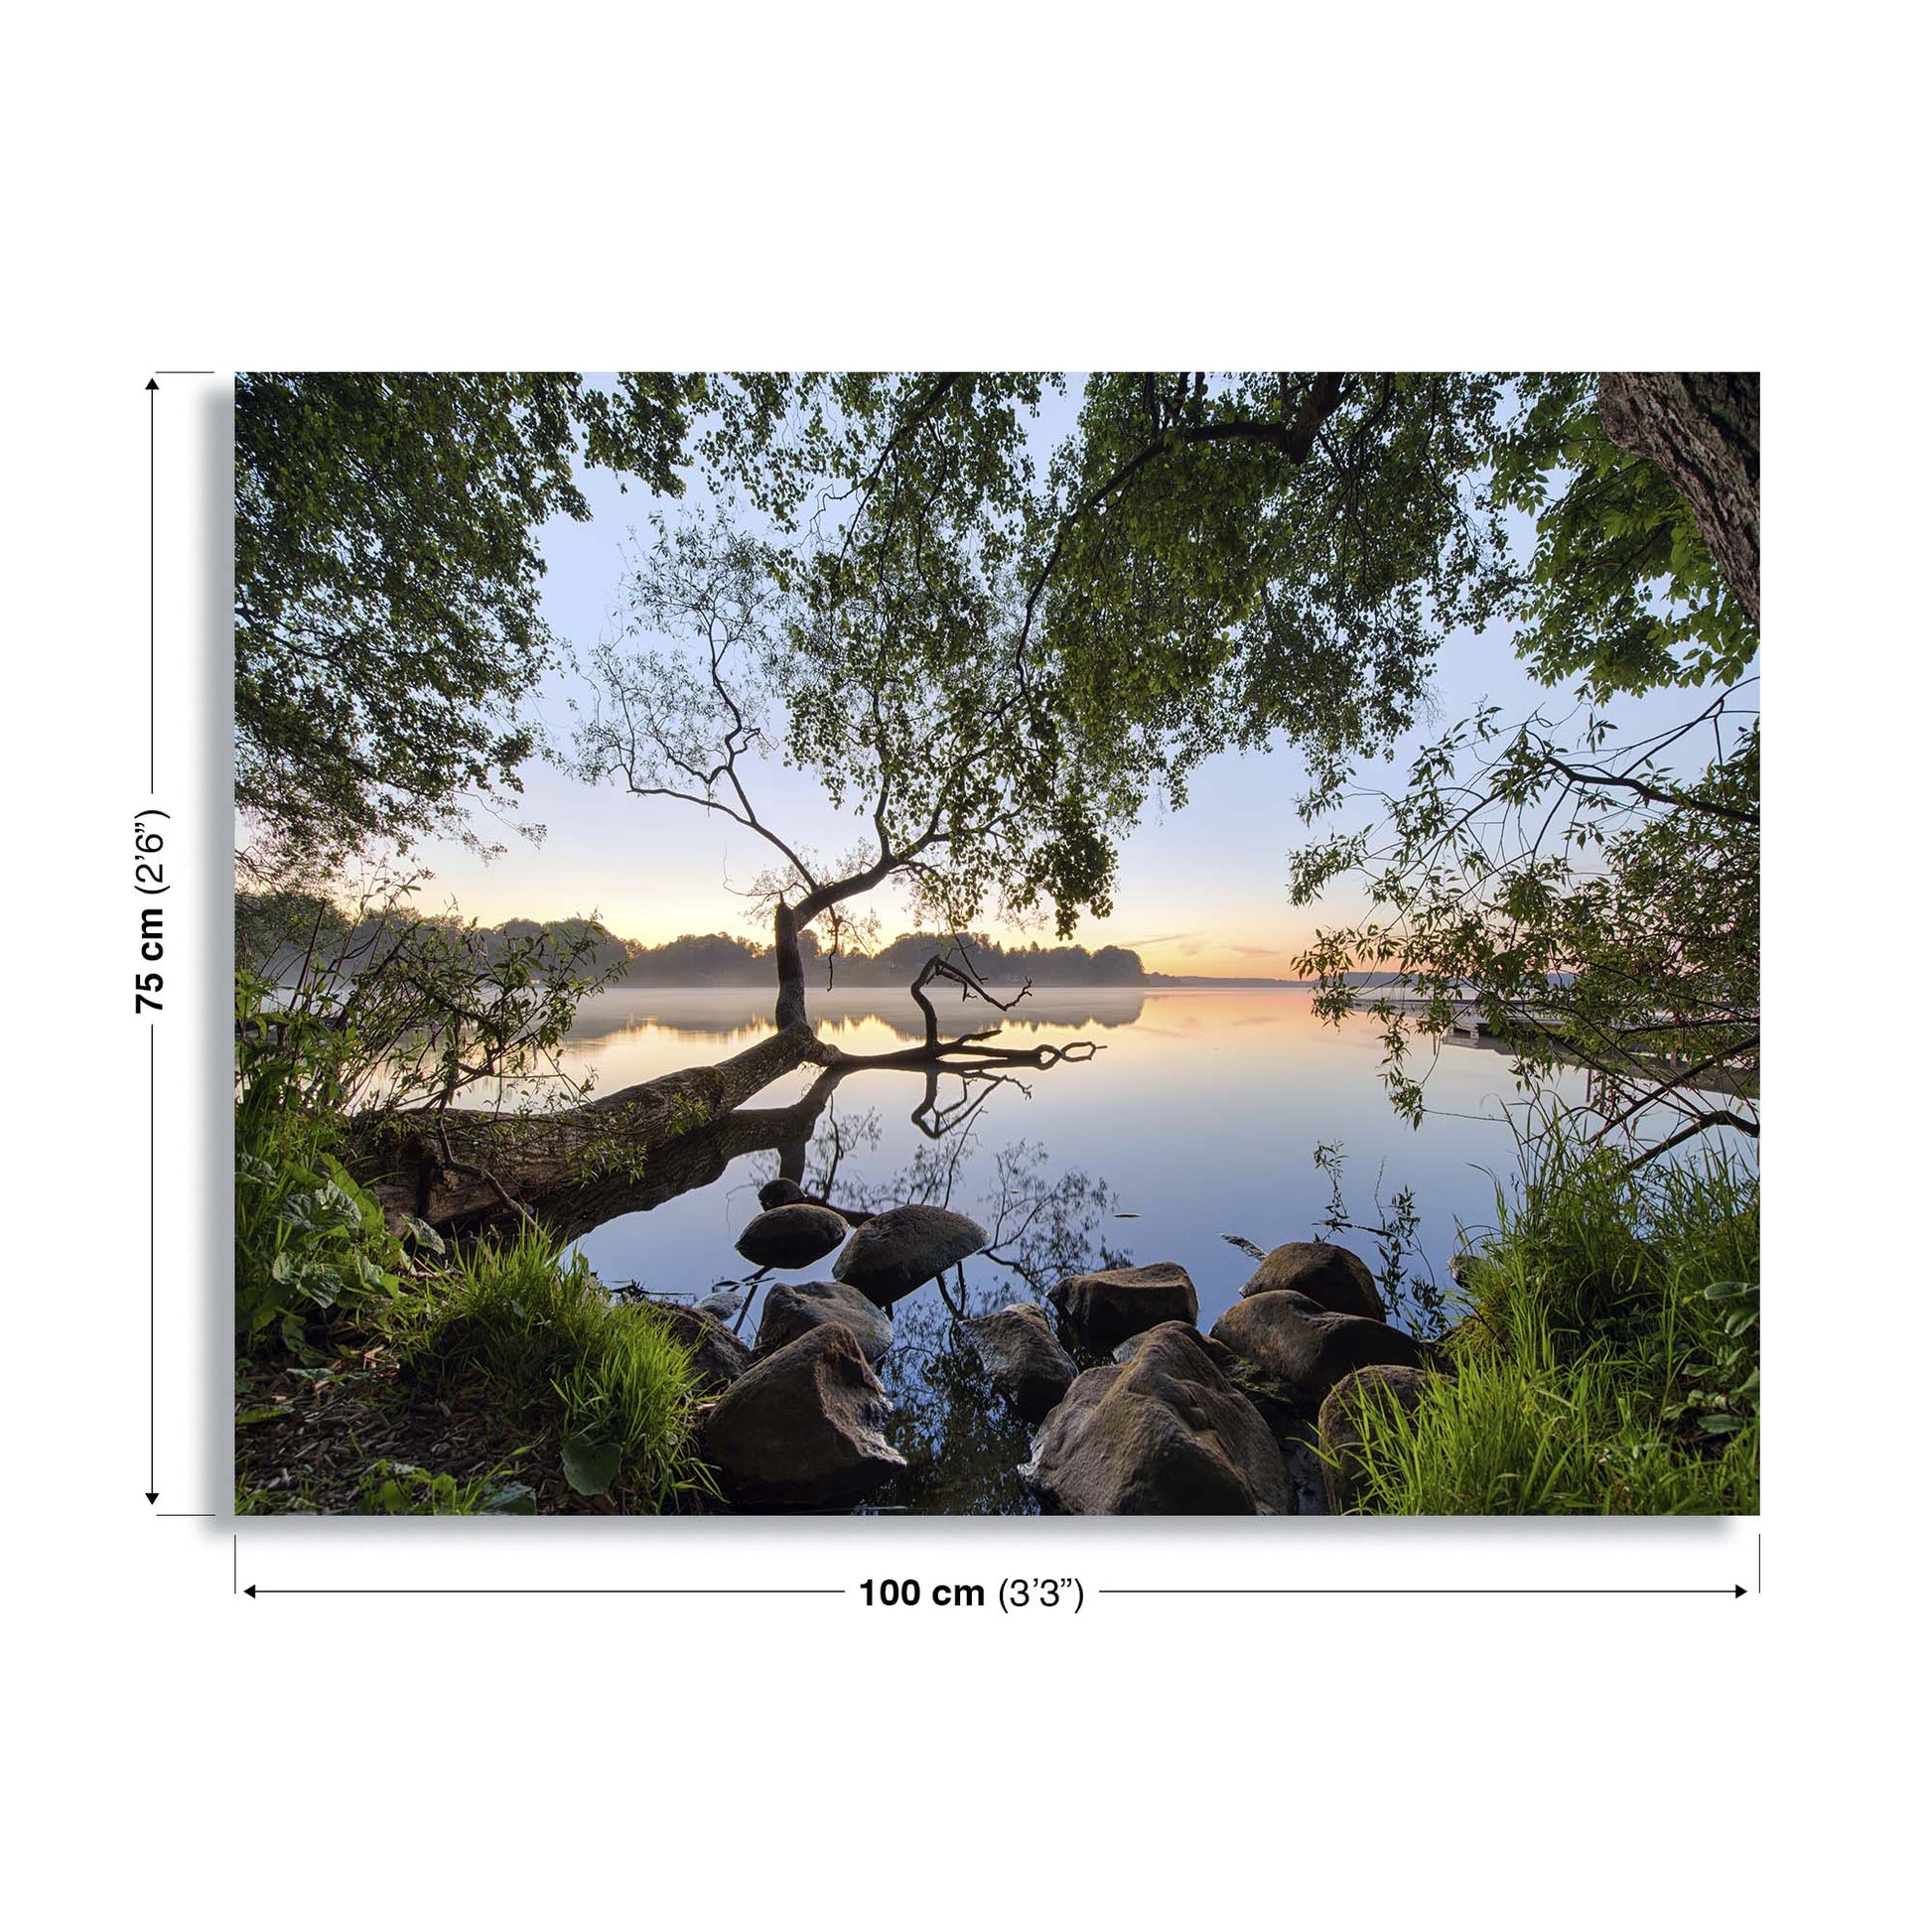 Lake View by Keller Canvas Print - USTAD HOME